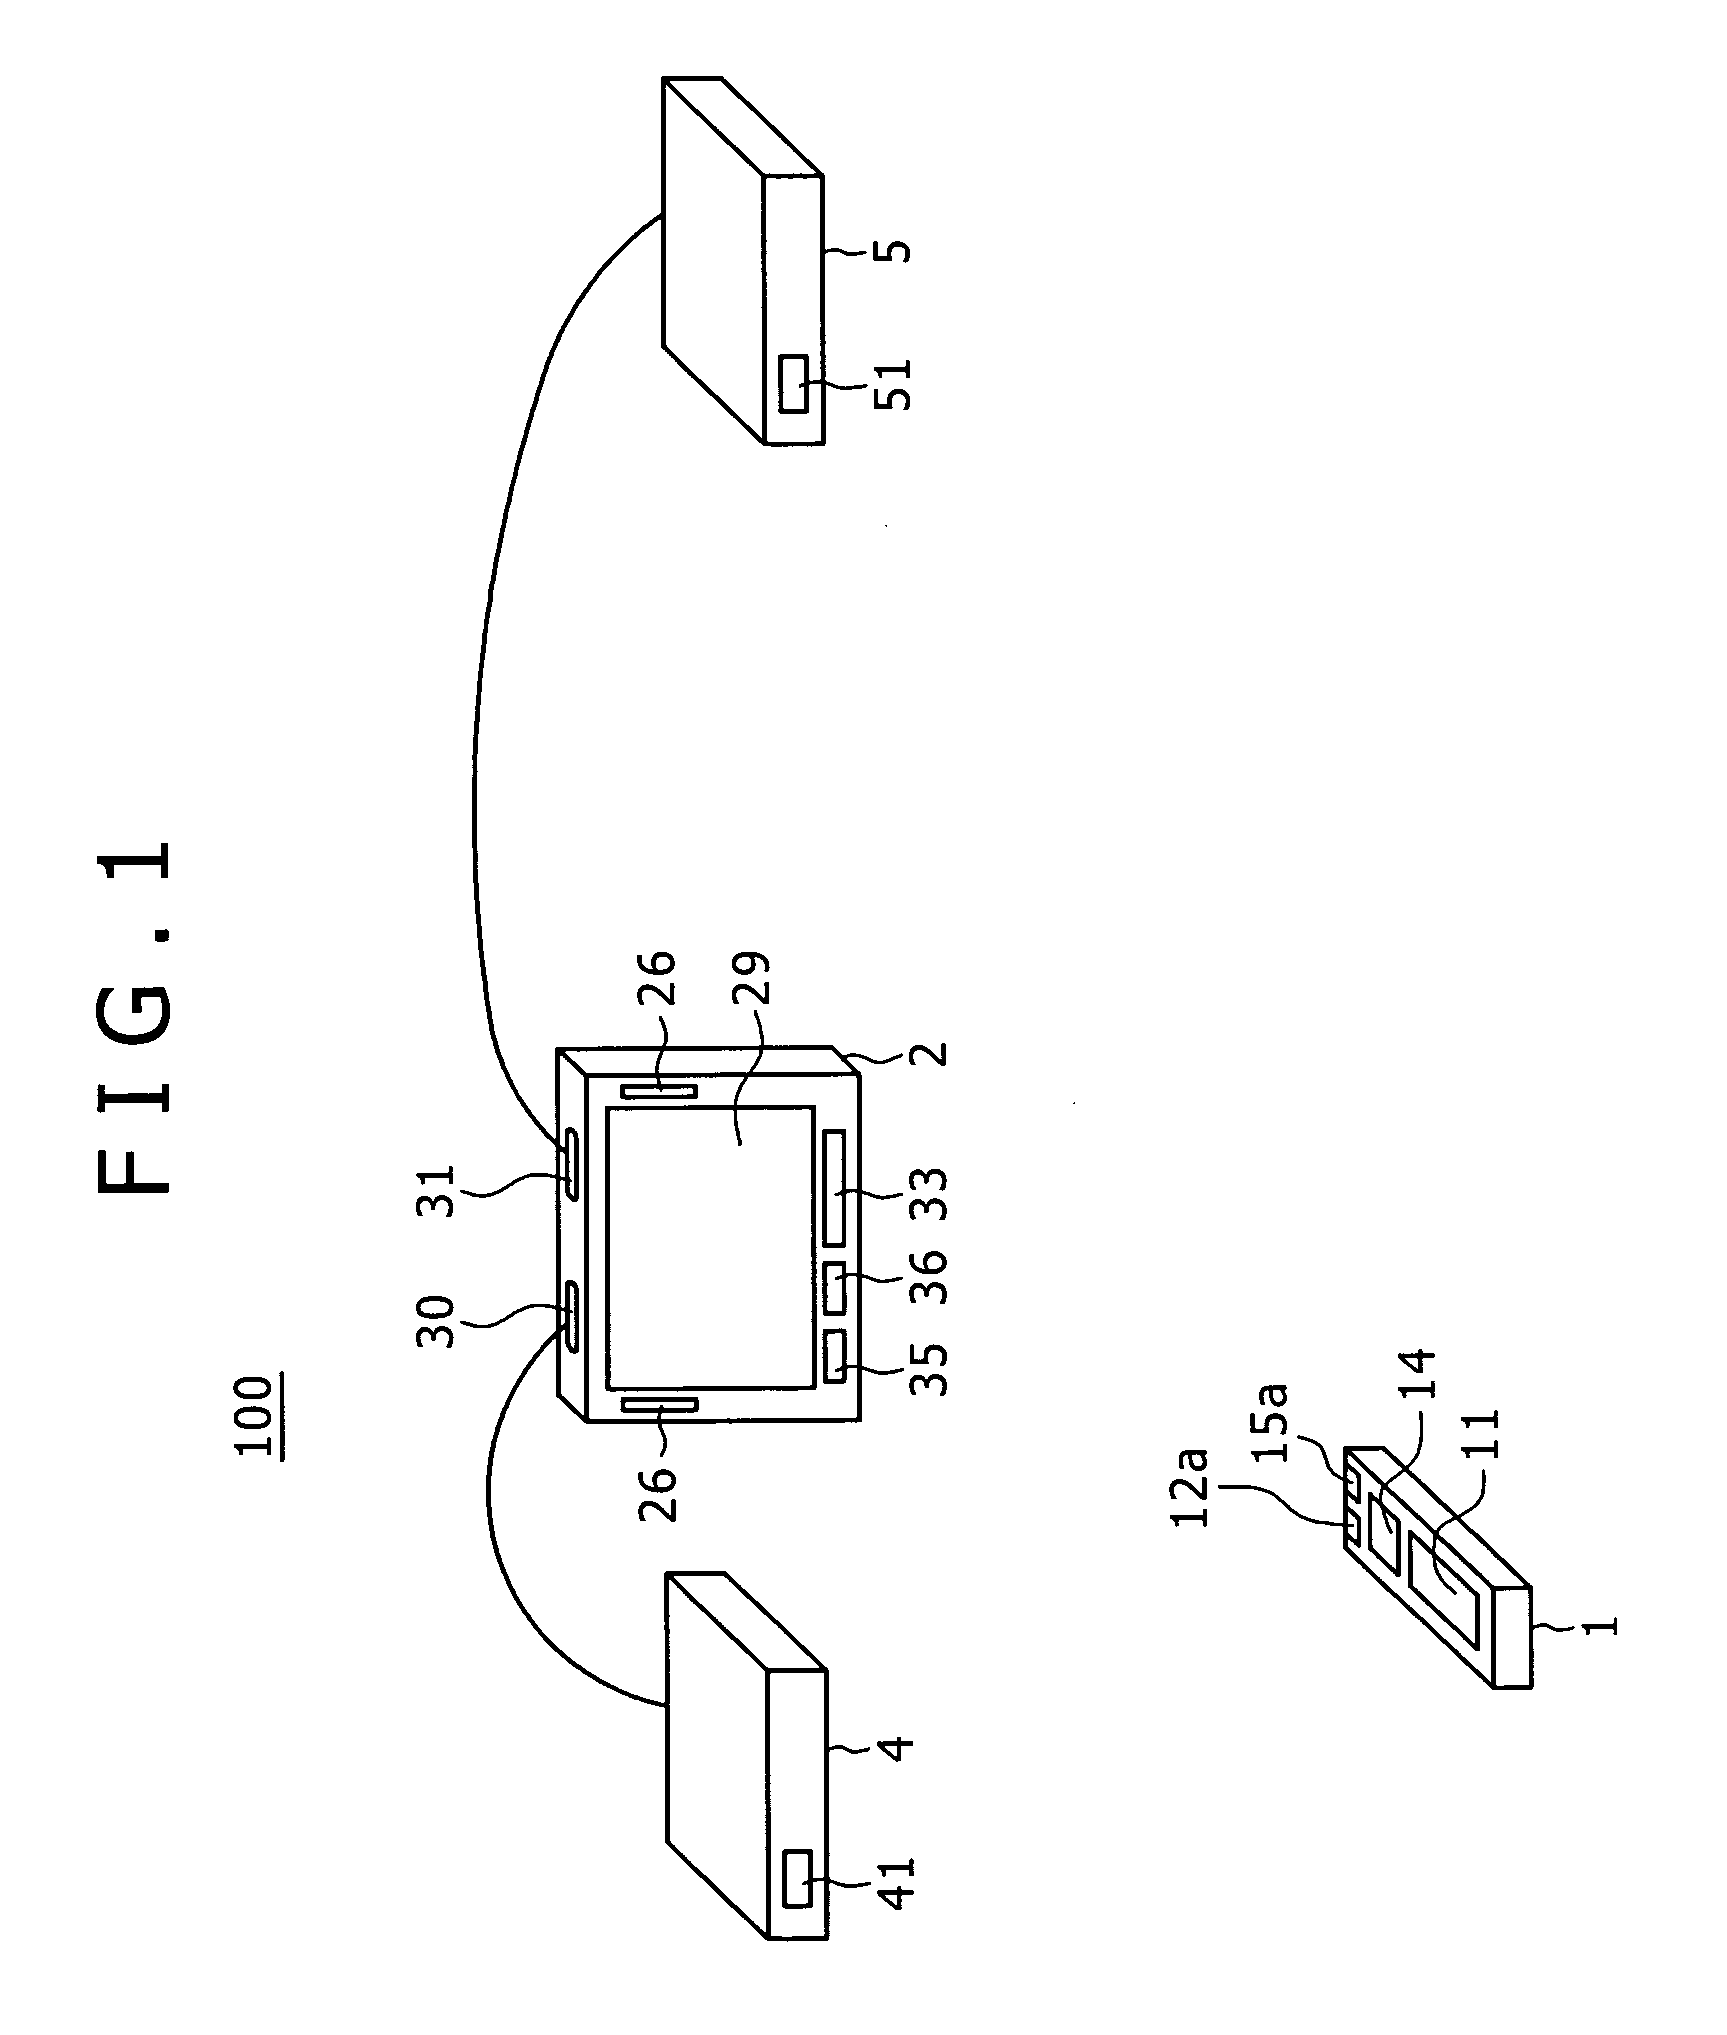 Remote controller, equipment operation system, and remote control method